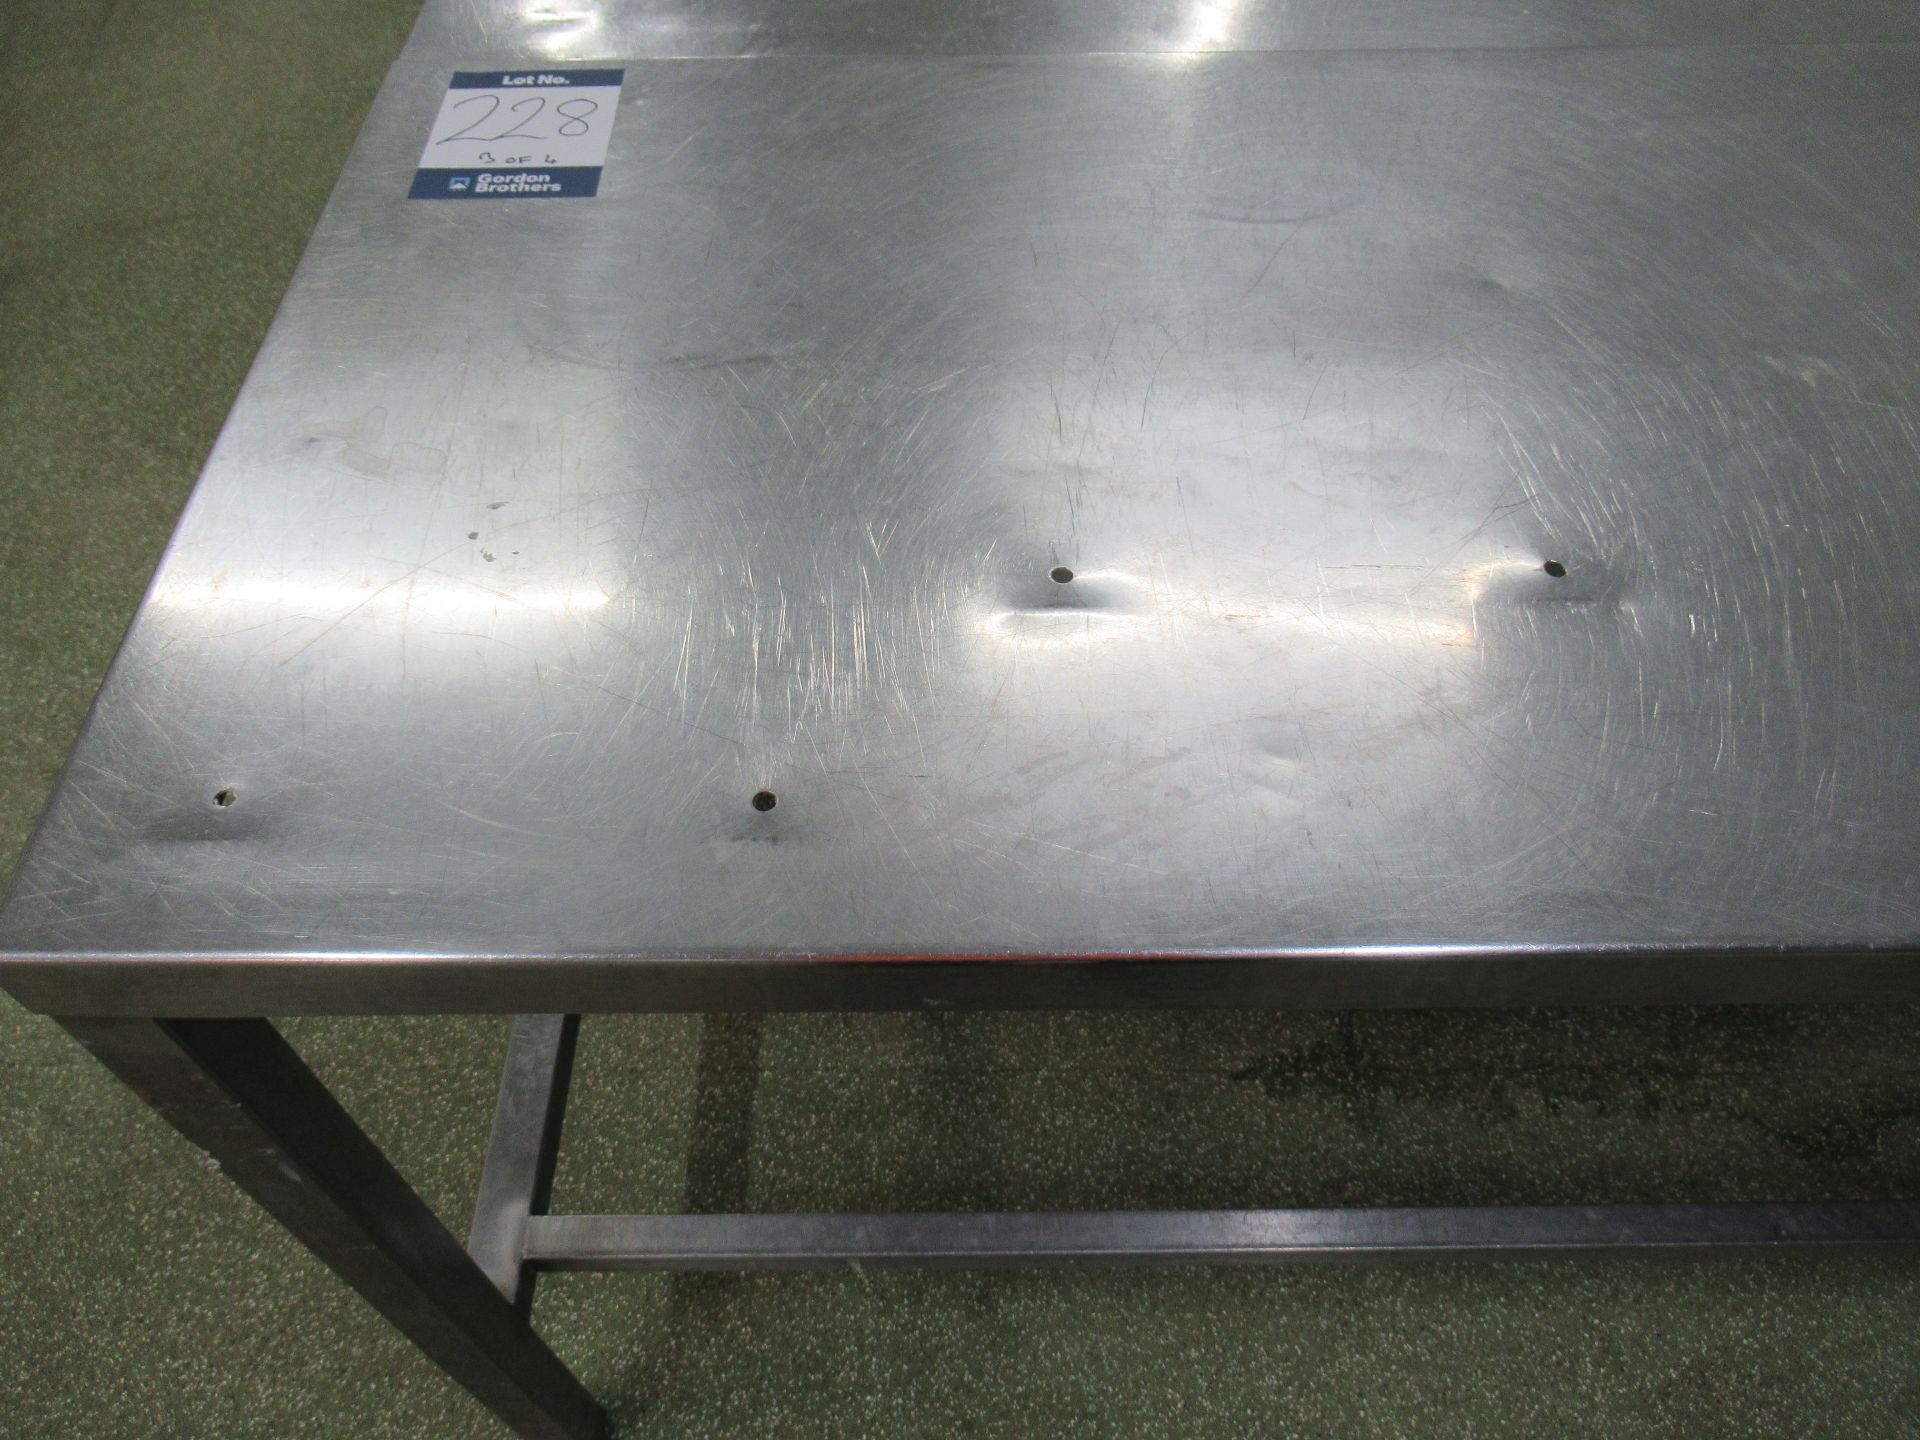 4 Stainless steel tables, one with 1800 x 600mm work surface and three with 1800 x 650mm work - Image 7 of 8